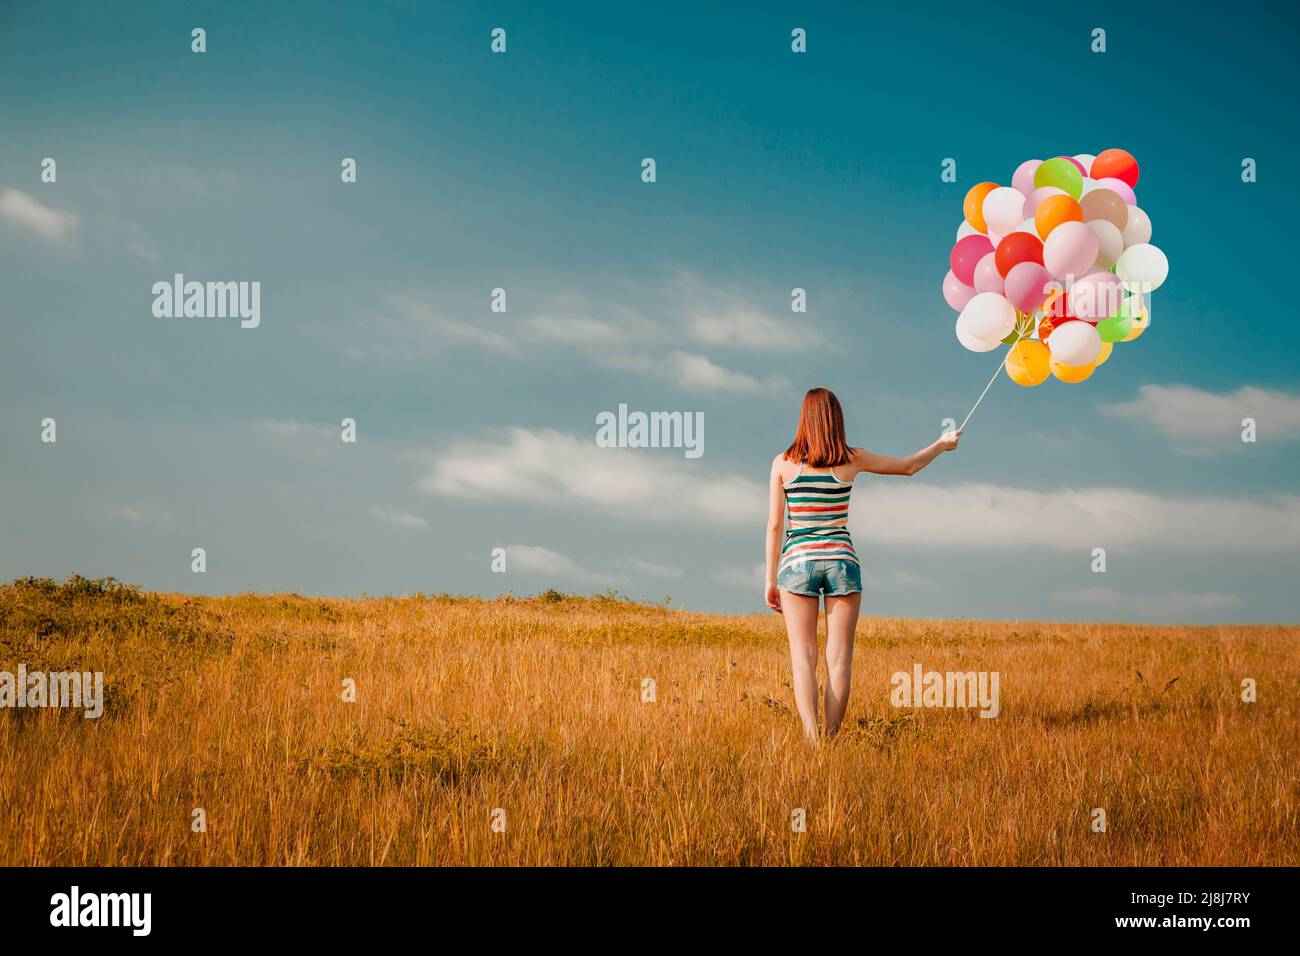 Young woman in the field holding colorful balloons Stock Photo